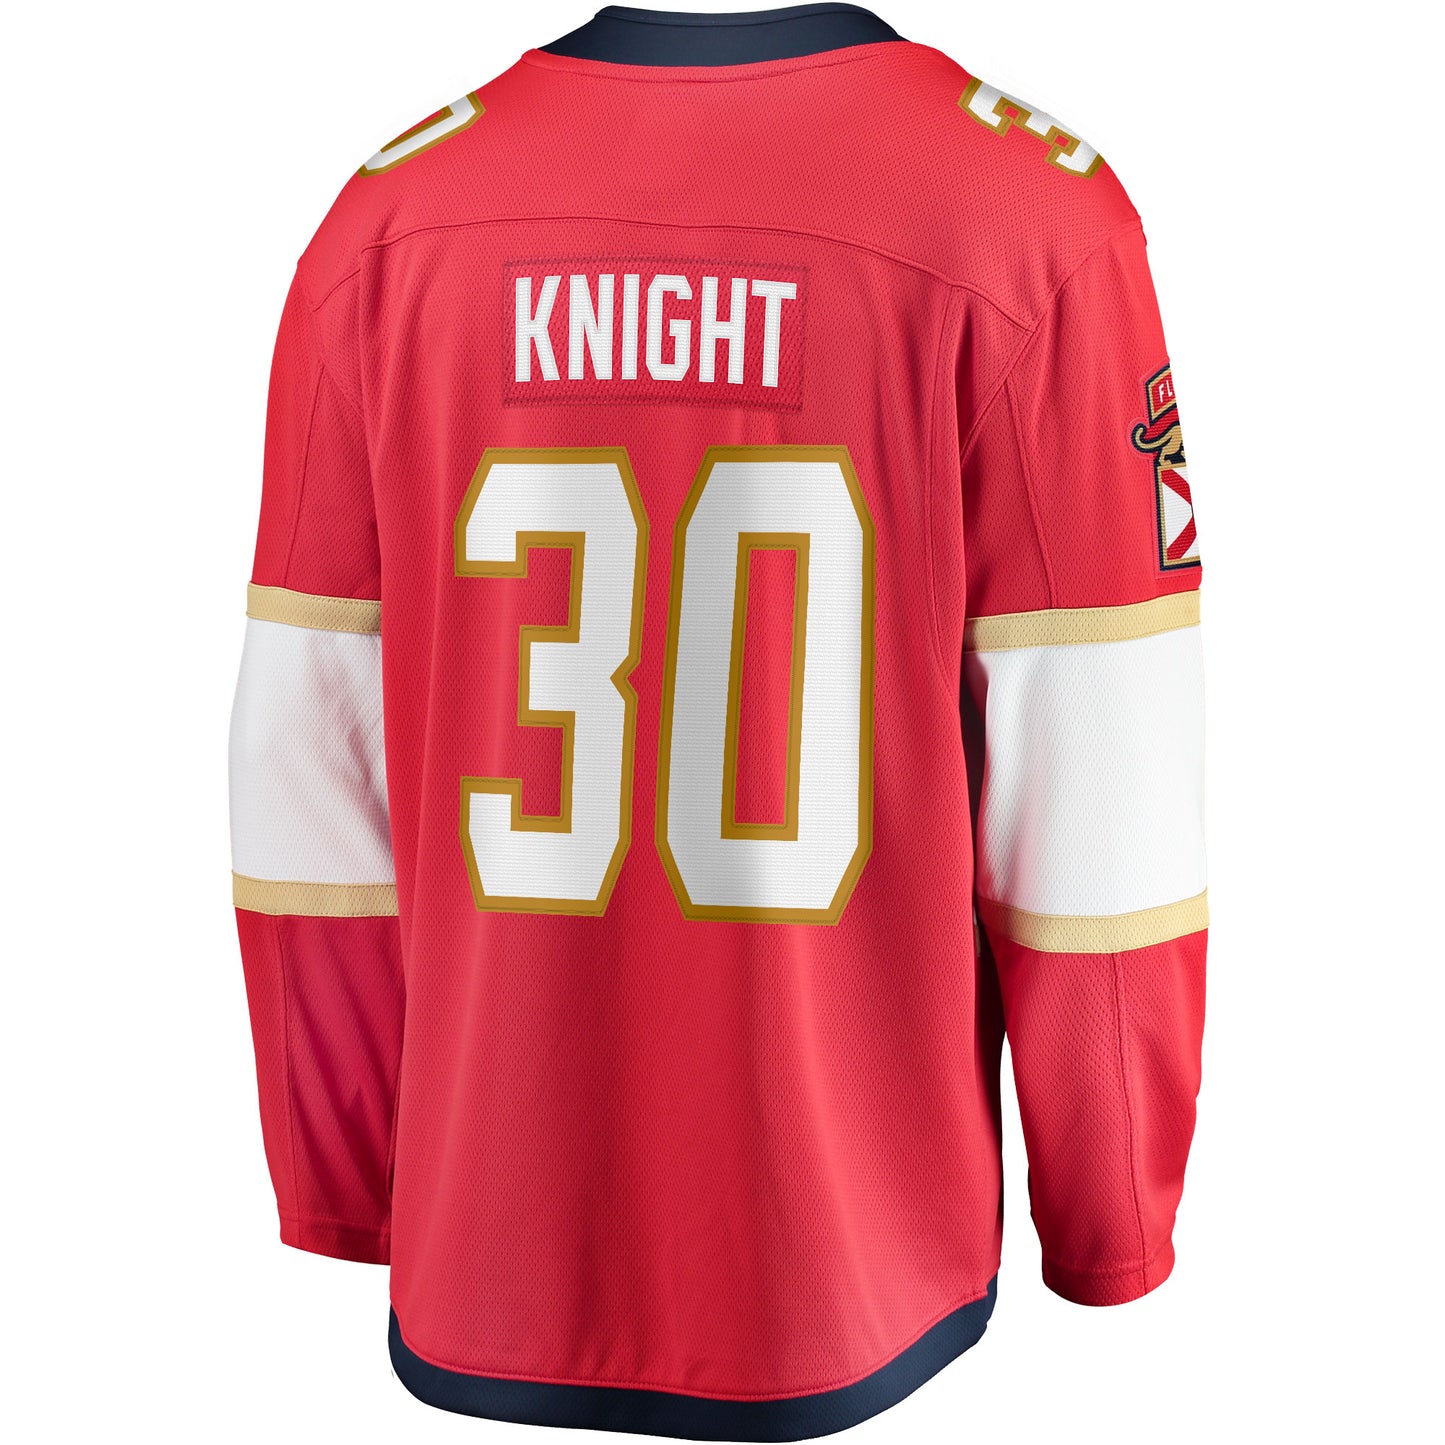 Spencer Knight Florida Panthers Fanatics Branded 2017/18 Home Breakaway Replica Jersey - Red